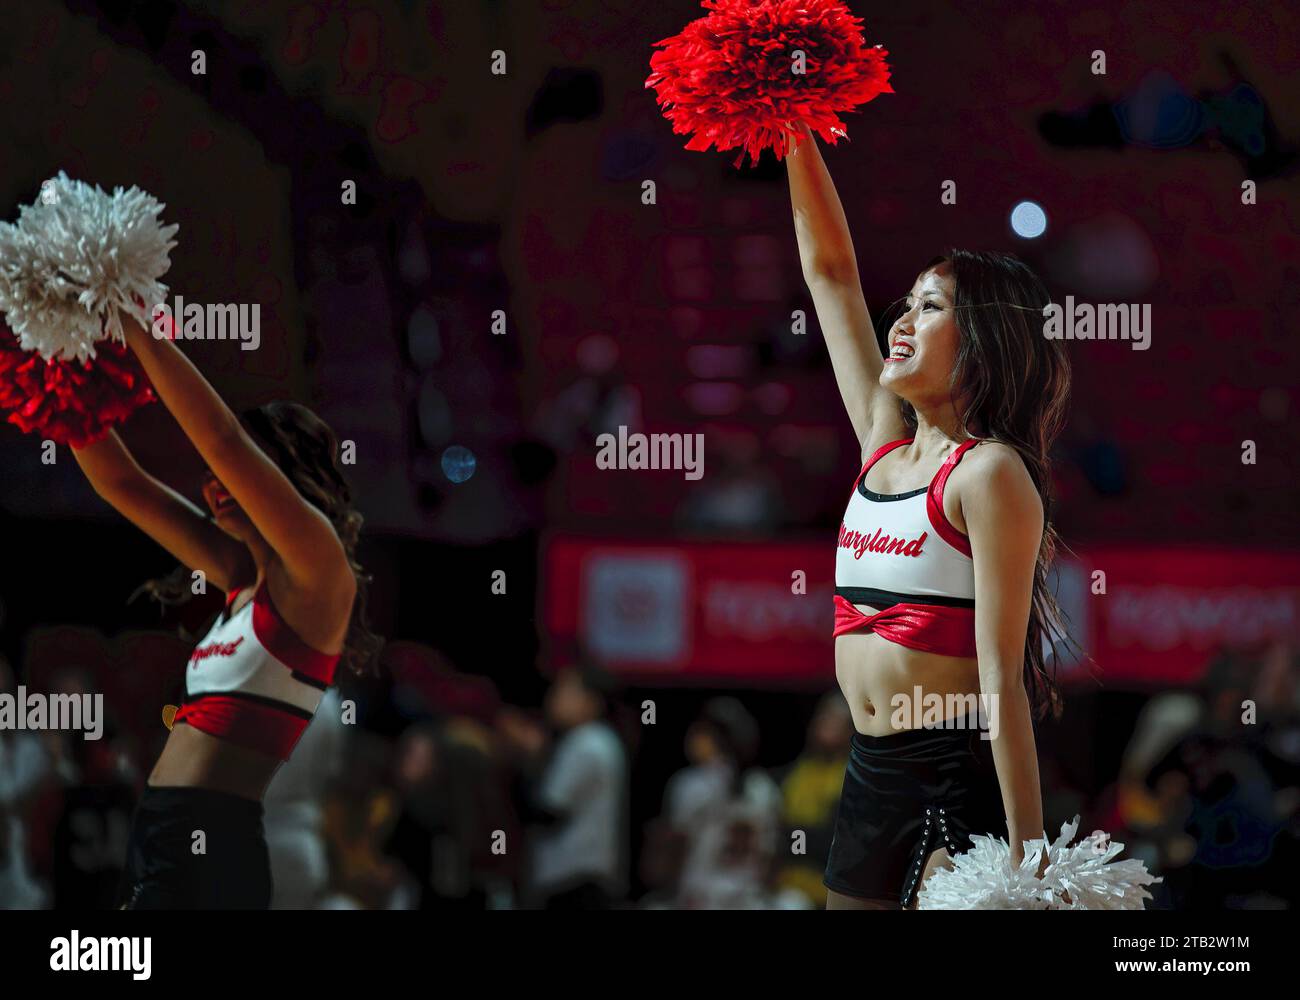 A cheerleader performs at a college basketball game Stock Photo